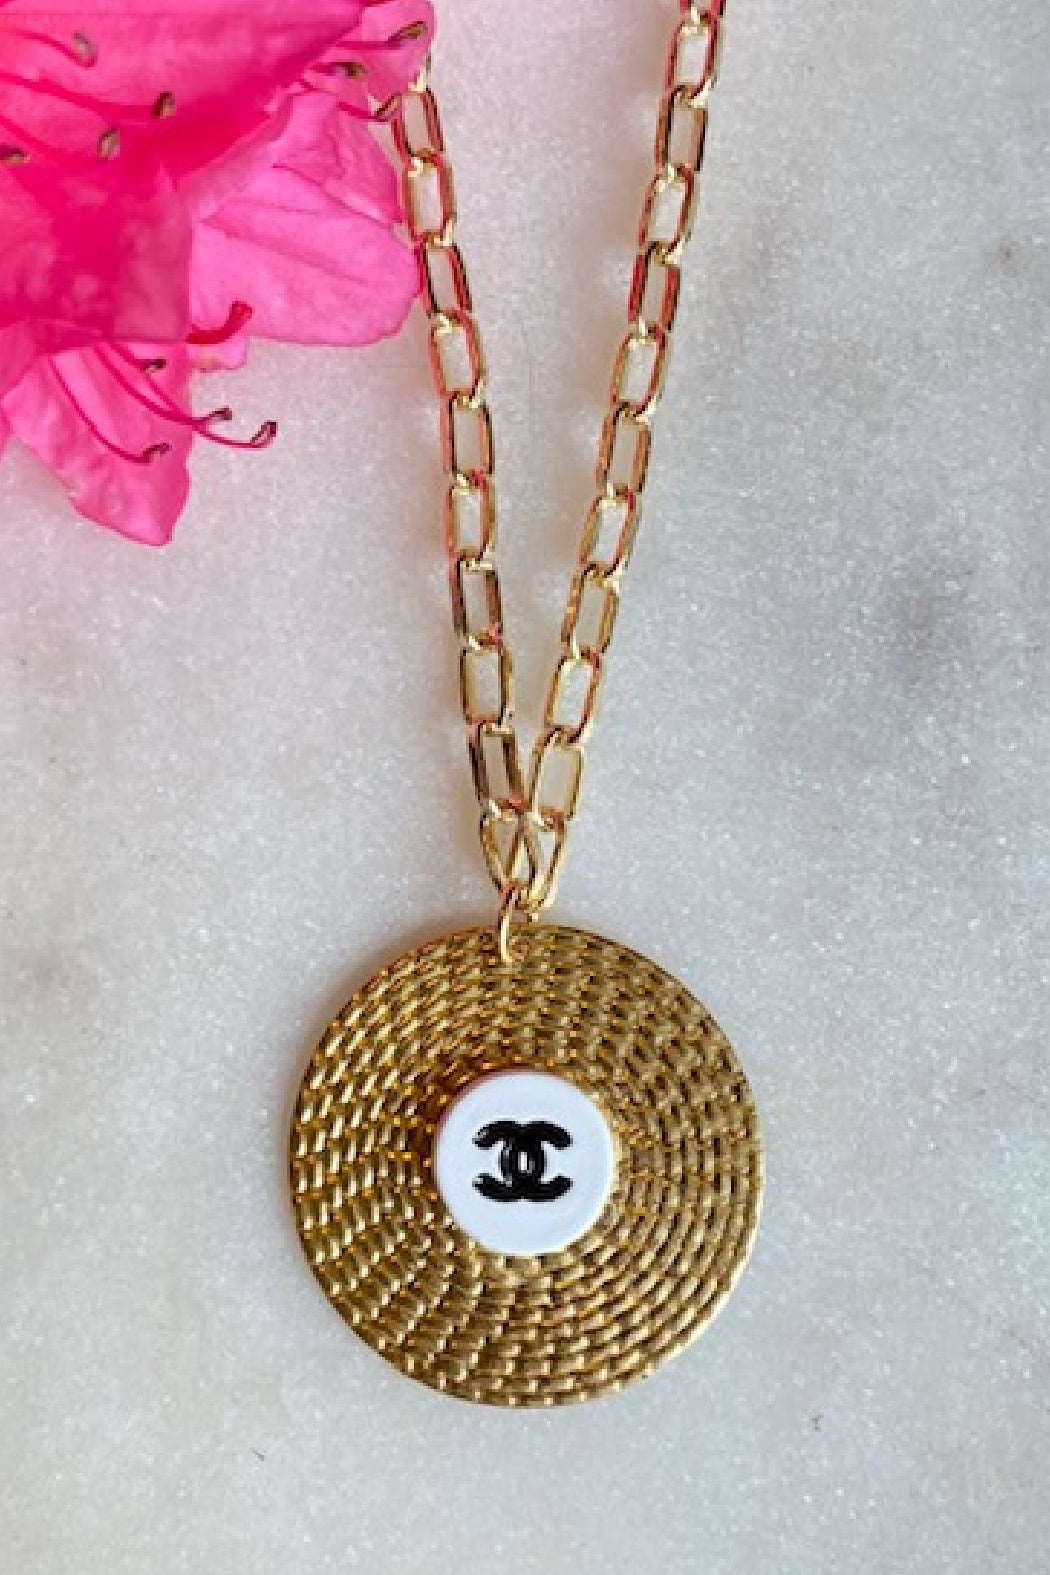 Tiny Button on Disk Necklace - Embellish Your Life 